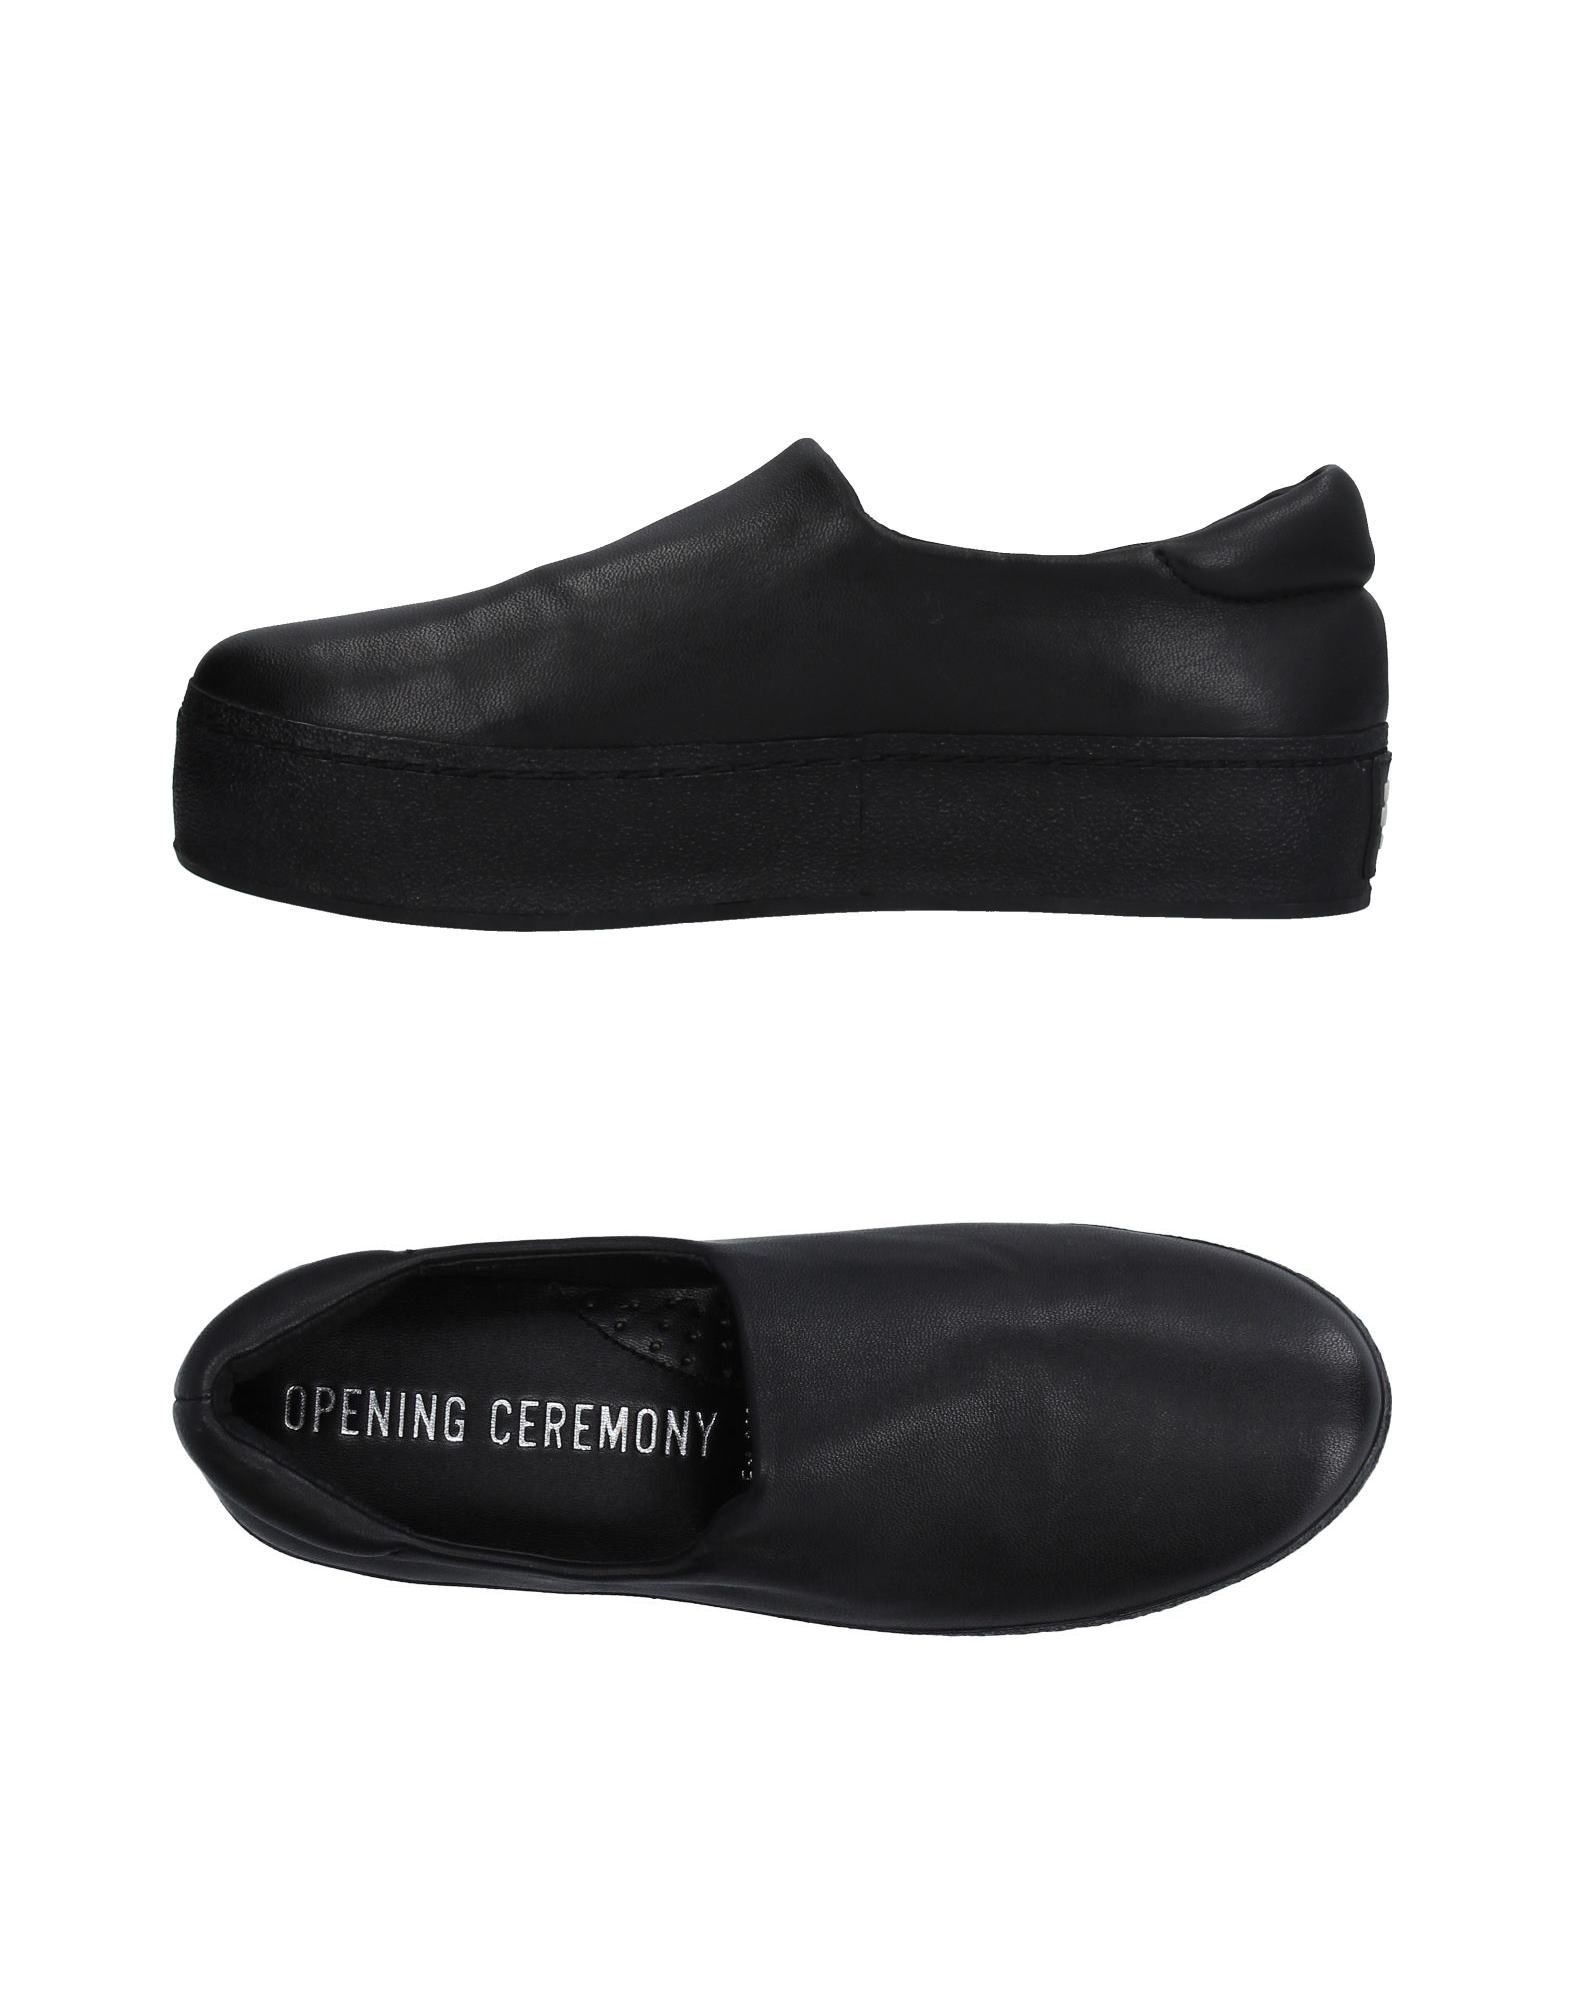 OPENING CEREMONY Sneakers,11231407LQ 13